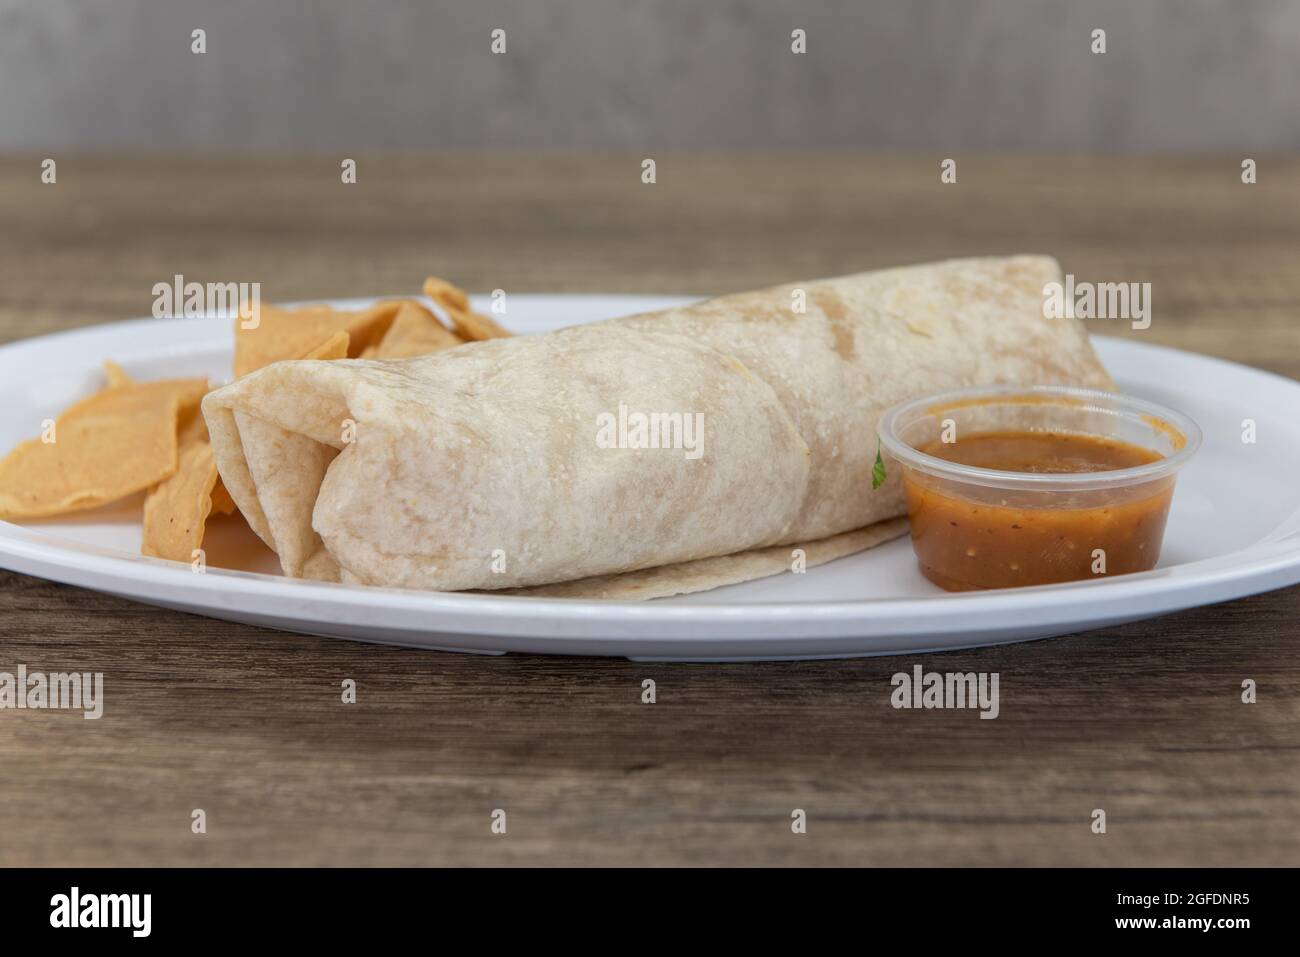 Hearty burrito wrapped in flour tortilla and served with chips and salsa on the side. Stock Photo